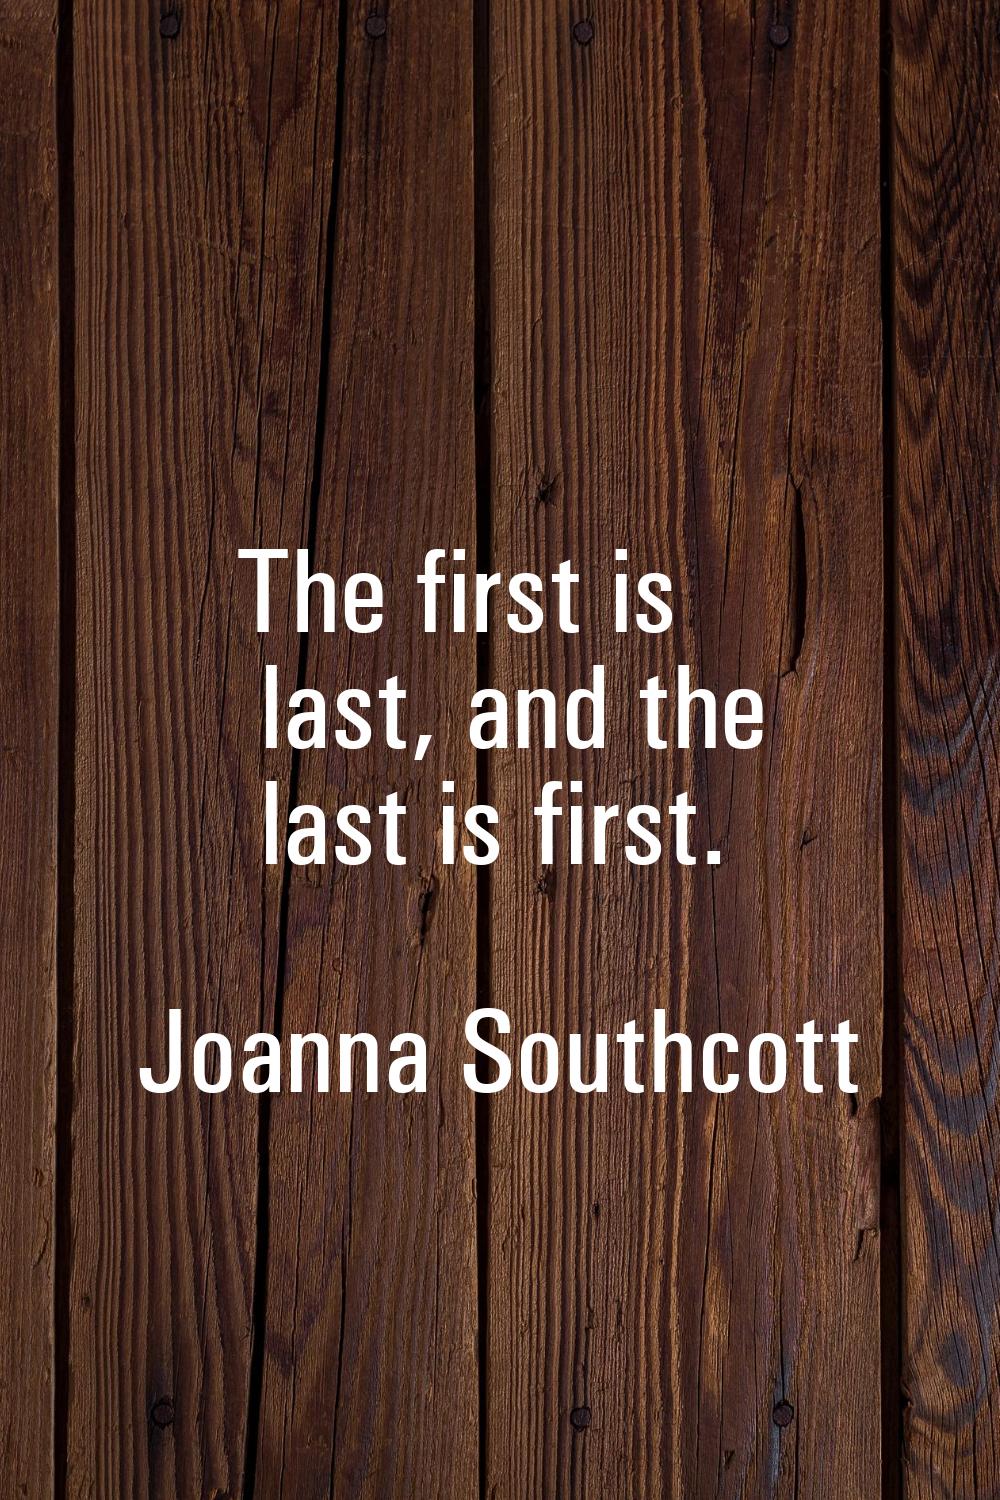 The first is last, and the last is first.